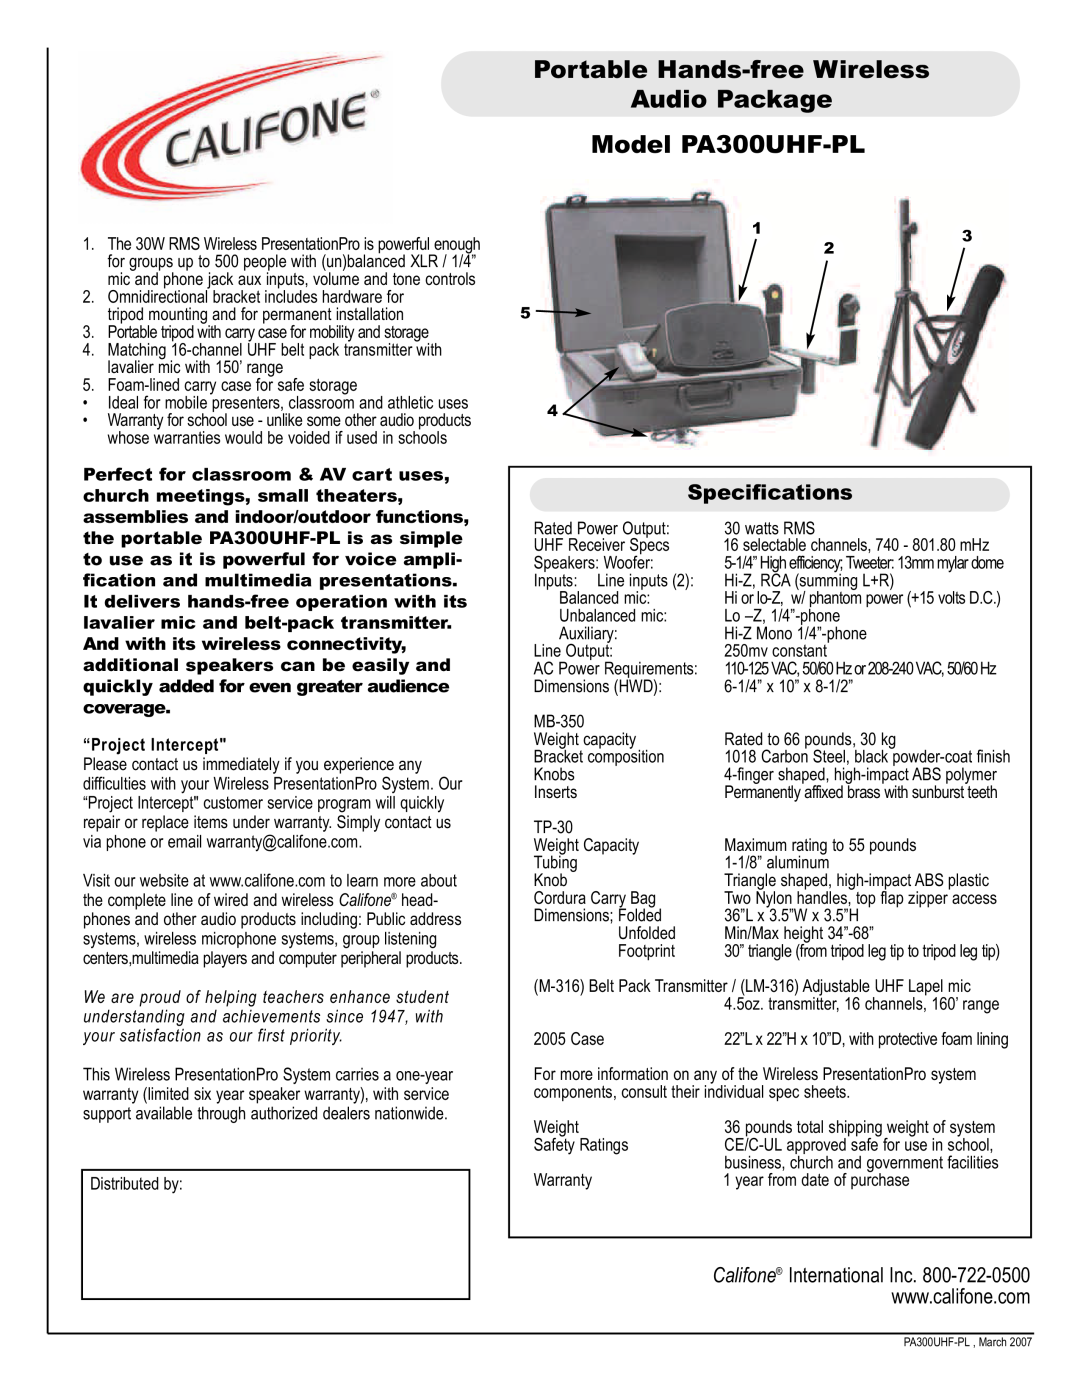 Califone specifications Portable Hands-freeWireless Audio Package, Model PA300UHF-PL, Specifications 